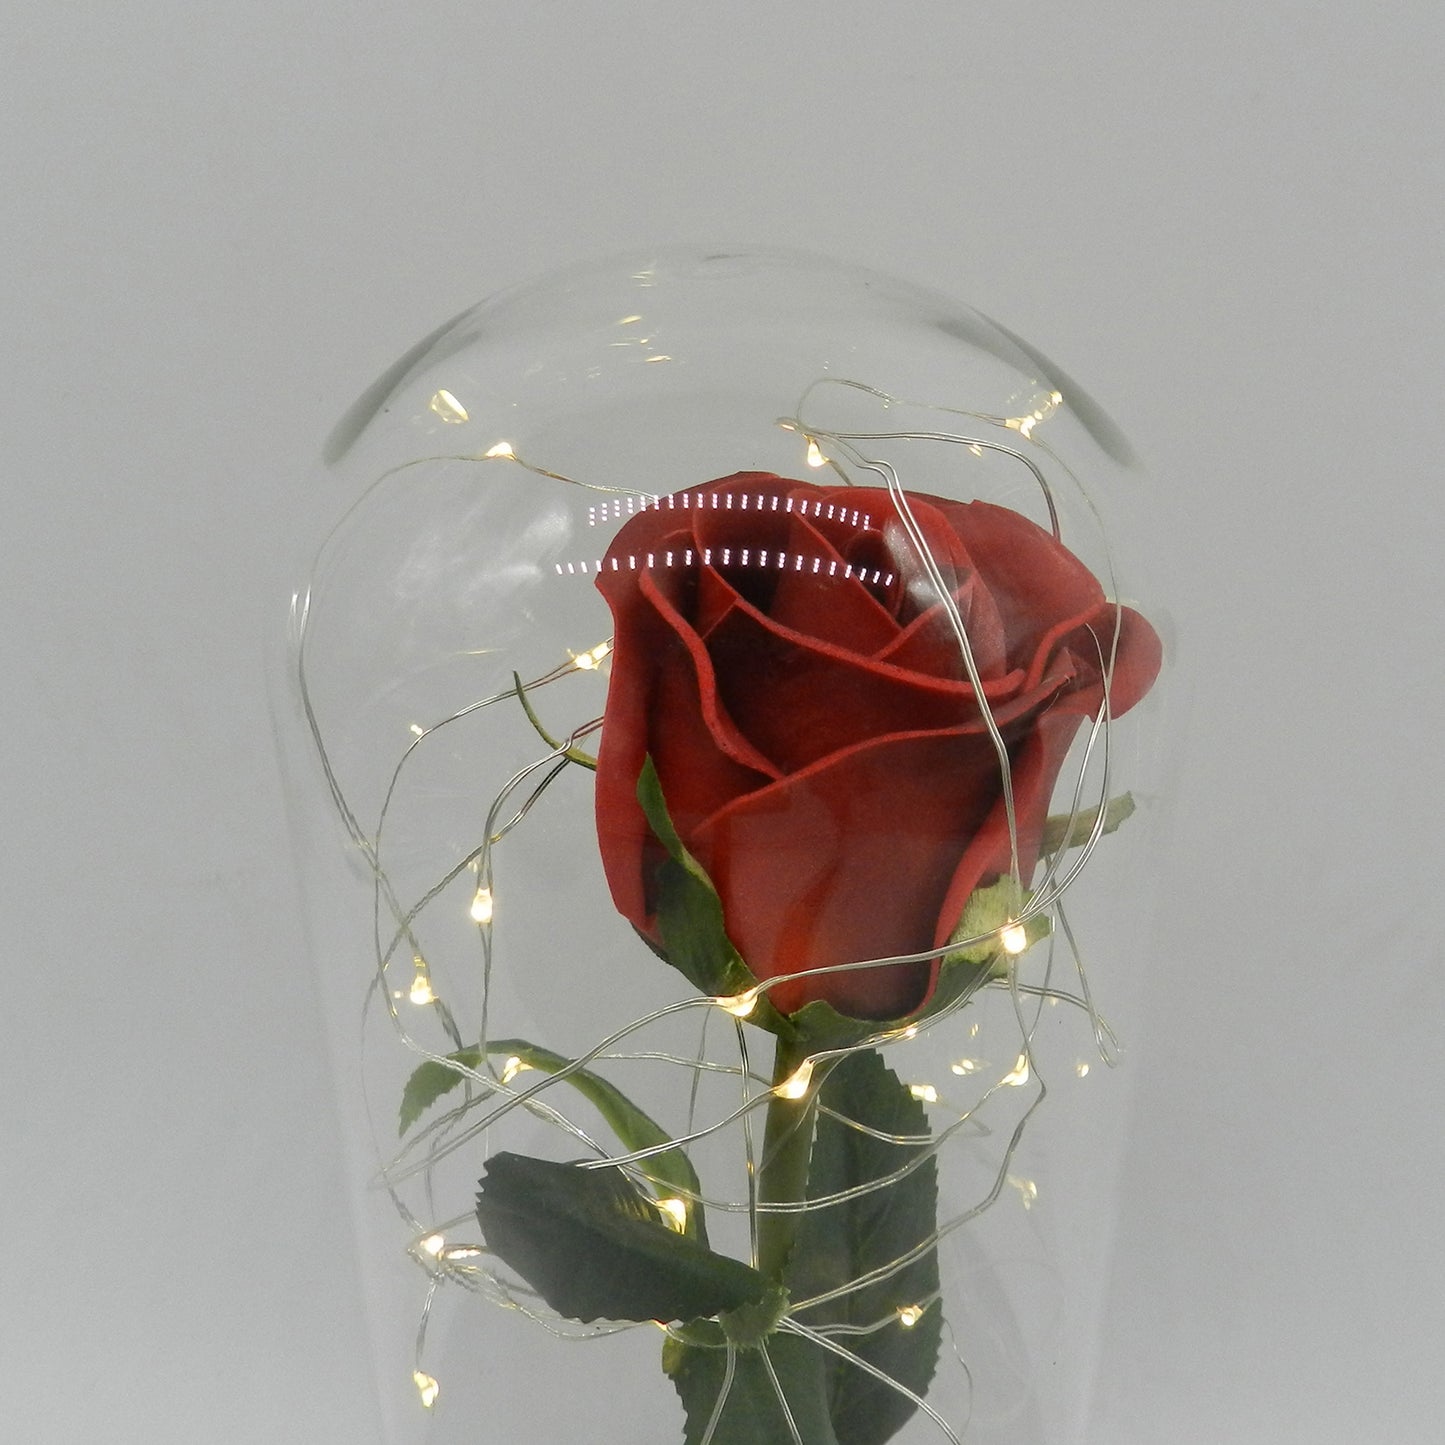 CVHOMEDECO. Battery Operated w/Timer LED Lighted and Red PU Rose with Fallen Petals in a Glass Dome, Great Gift for Valentine's Day Wedding Anniversary Birthday, Dia. 4.5 x H 11.25 Inch